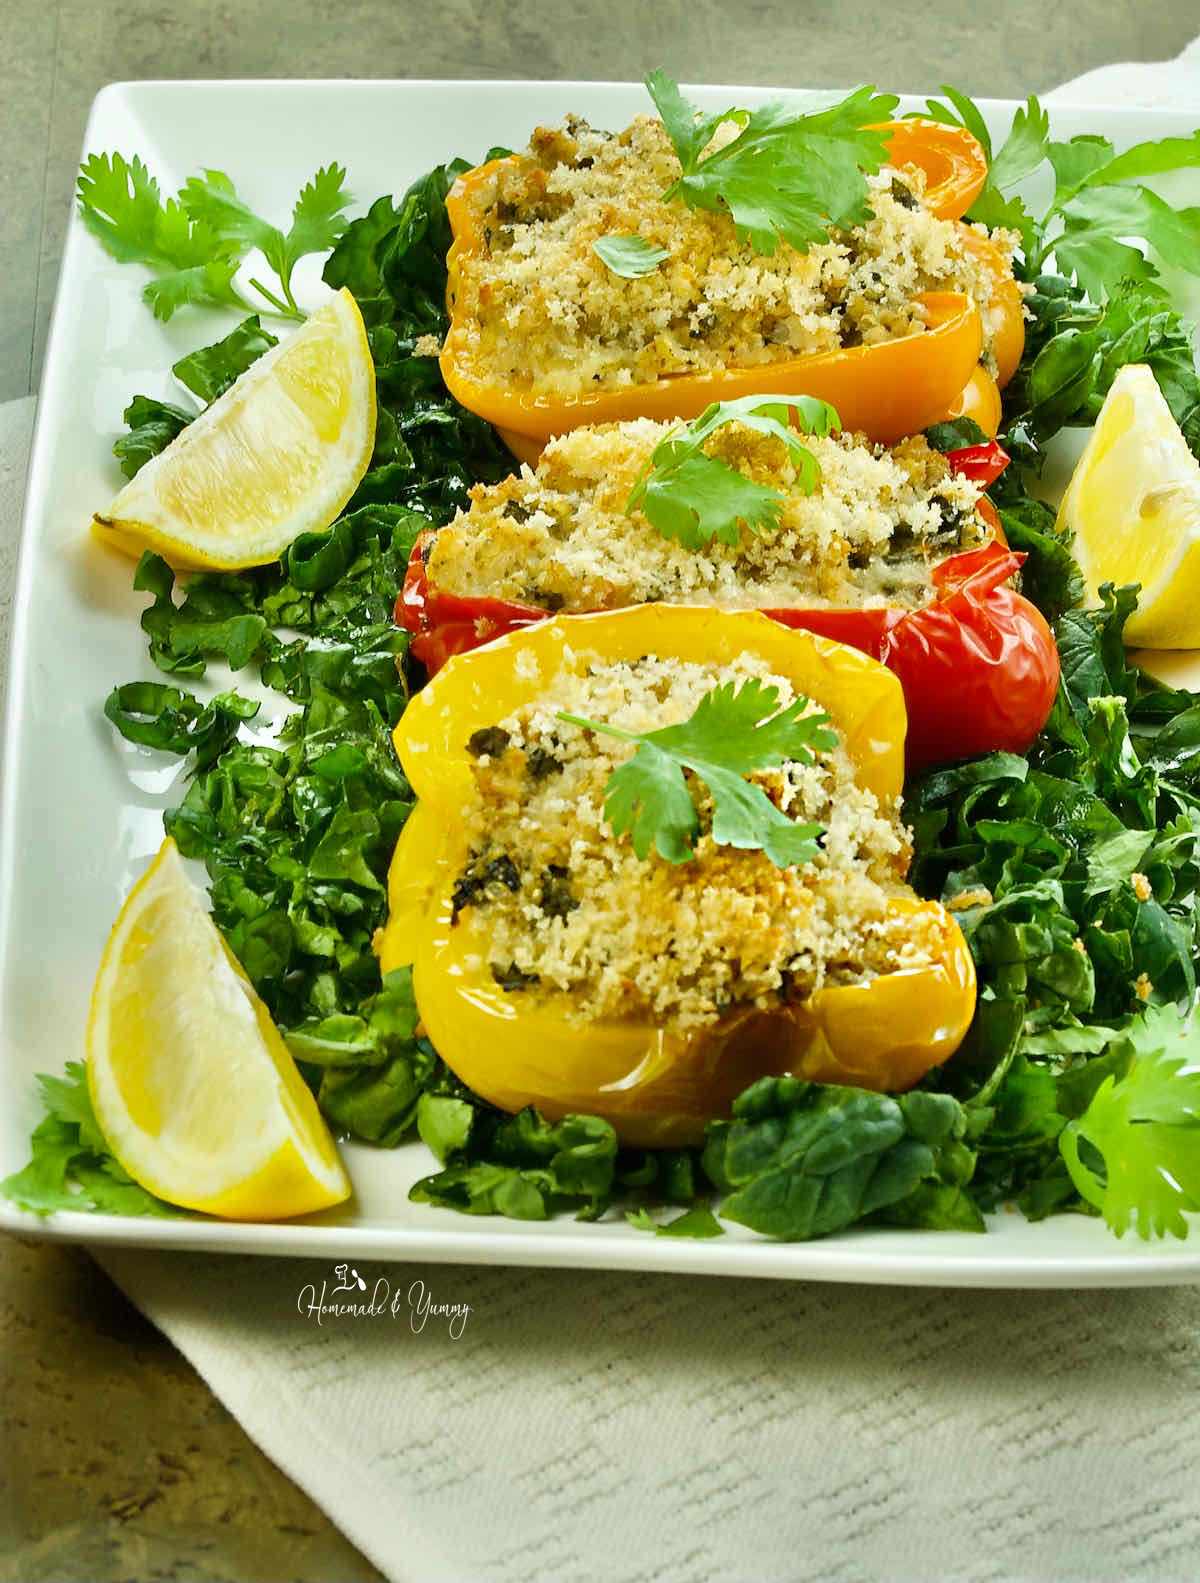 Meatless peppers stuffed with crab and quinoa ready to eat.